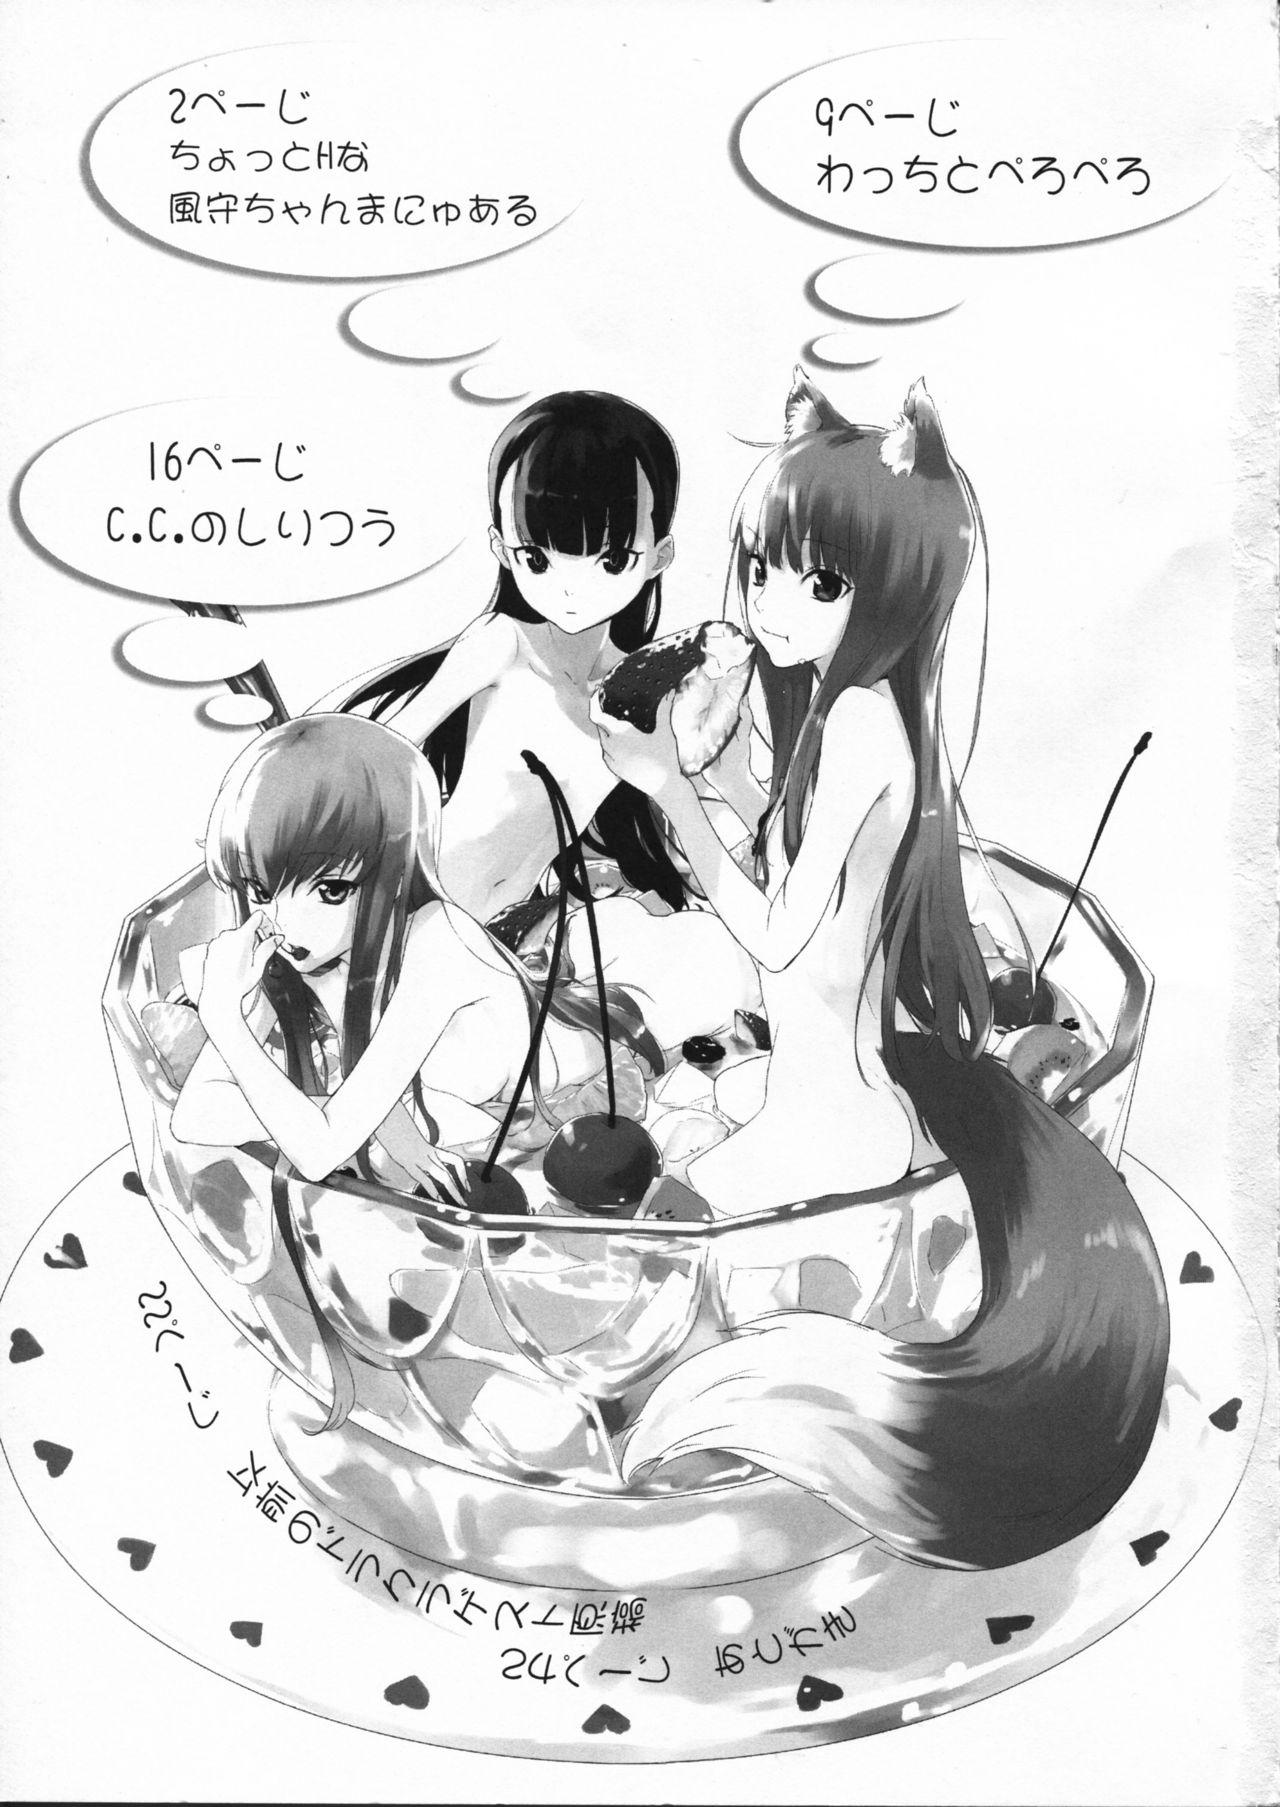 Soles Ajisai Maiden vol.1 - Code geass Spice and wolf Un-go Cock - Page 3